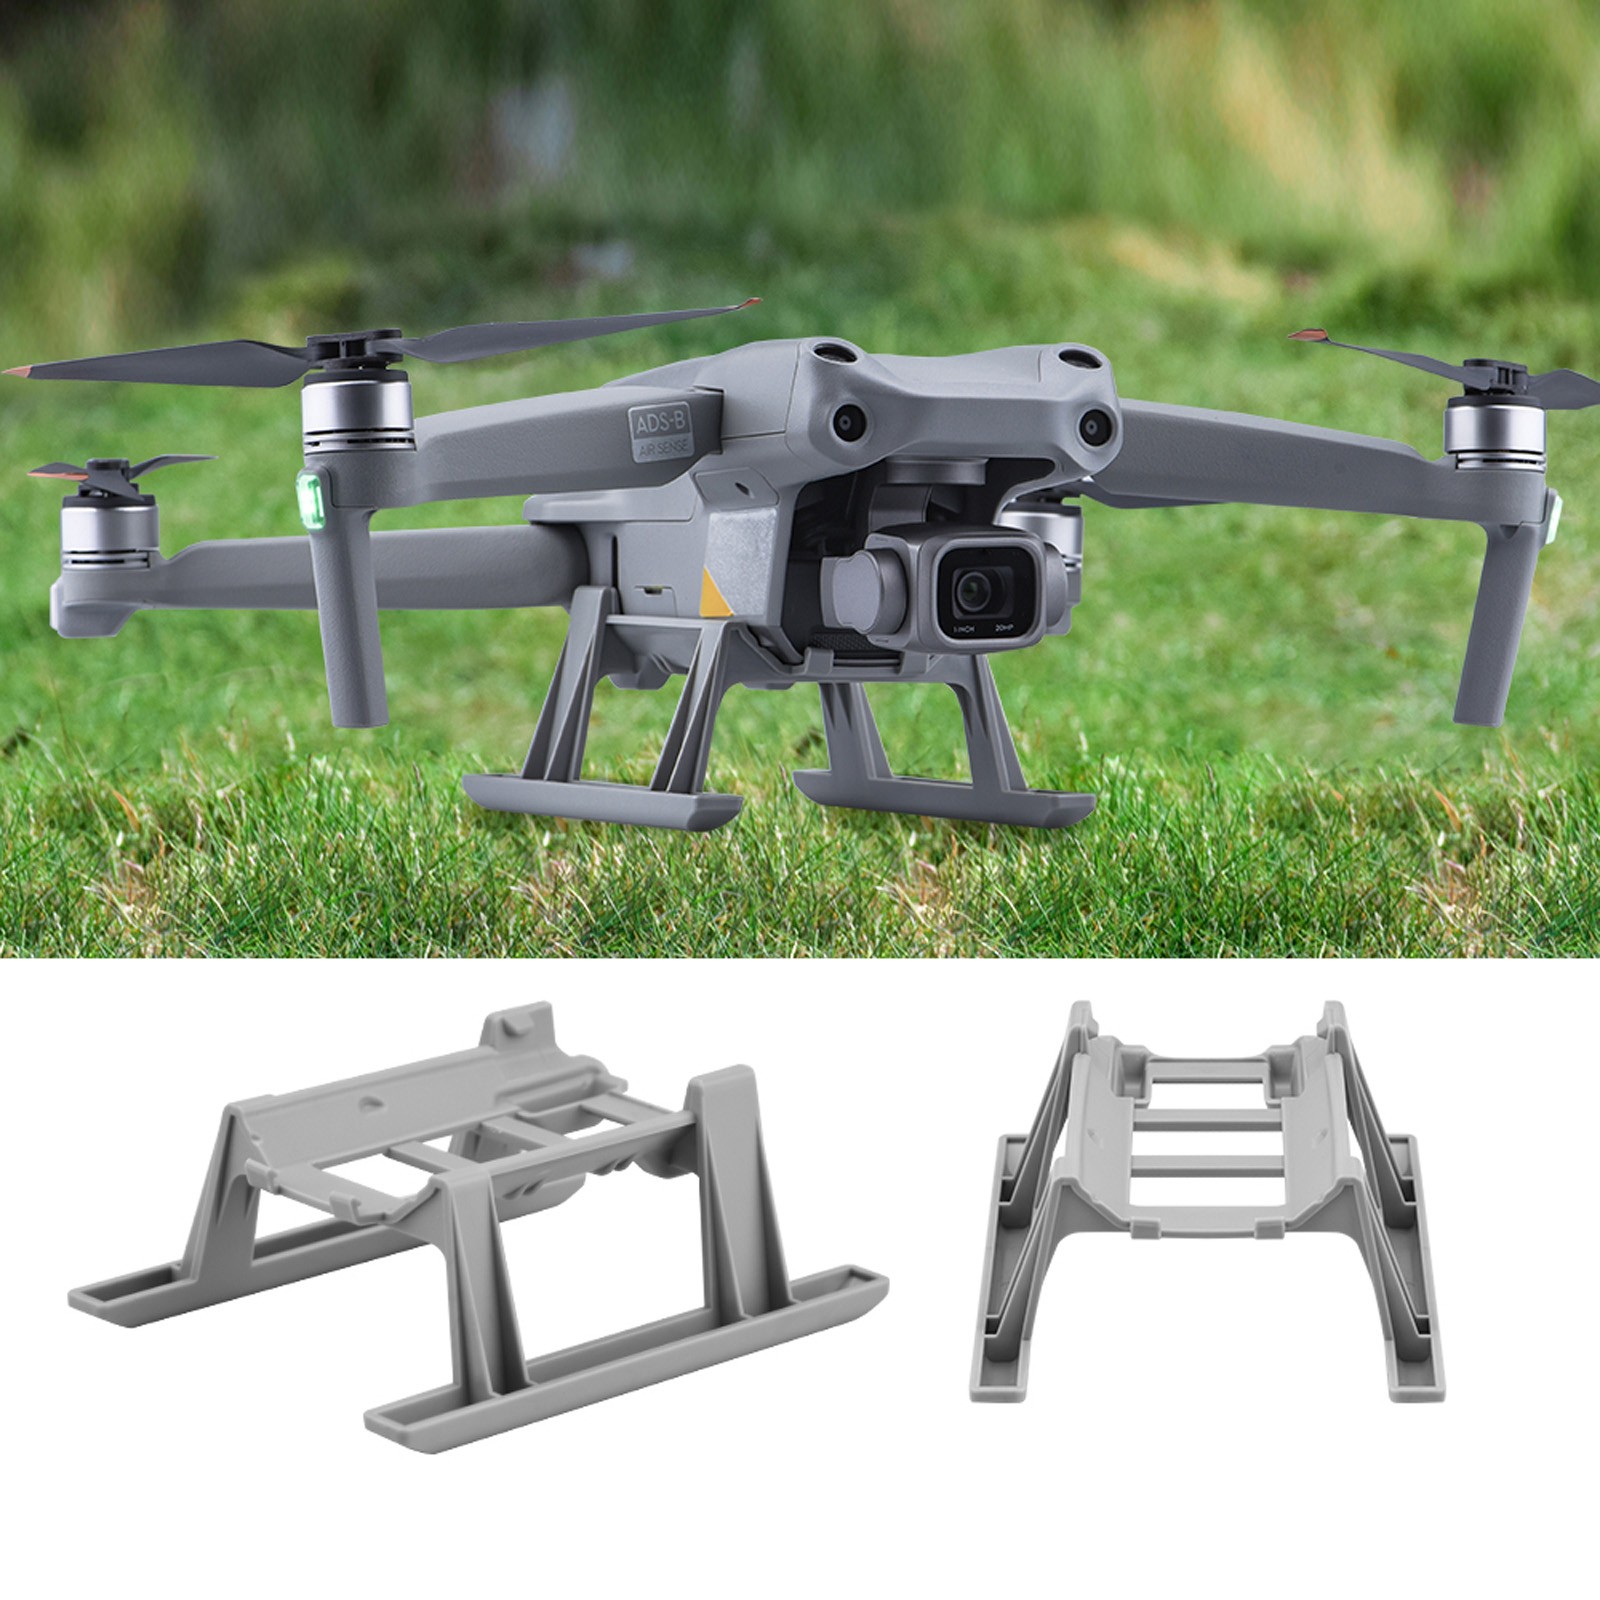 Landing Gear Support Extensions Protector compitable with mavic Air 2/Air 2S - Walmart.com